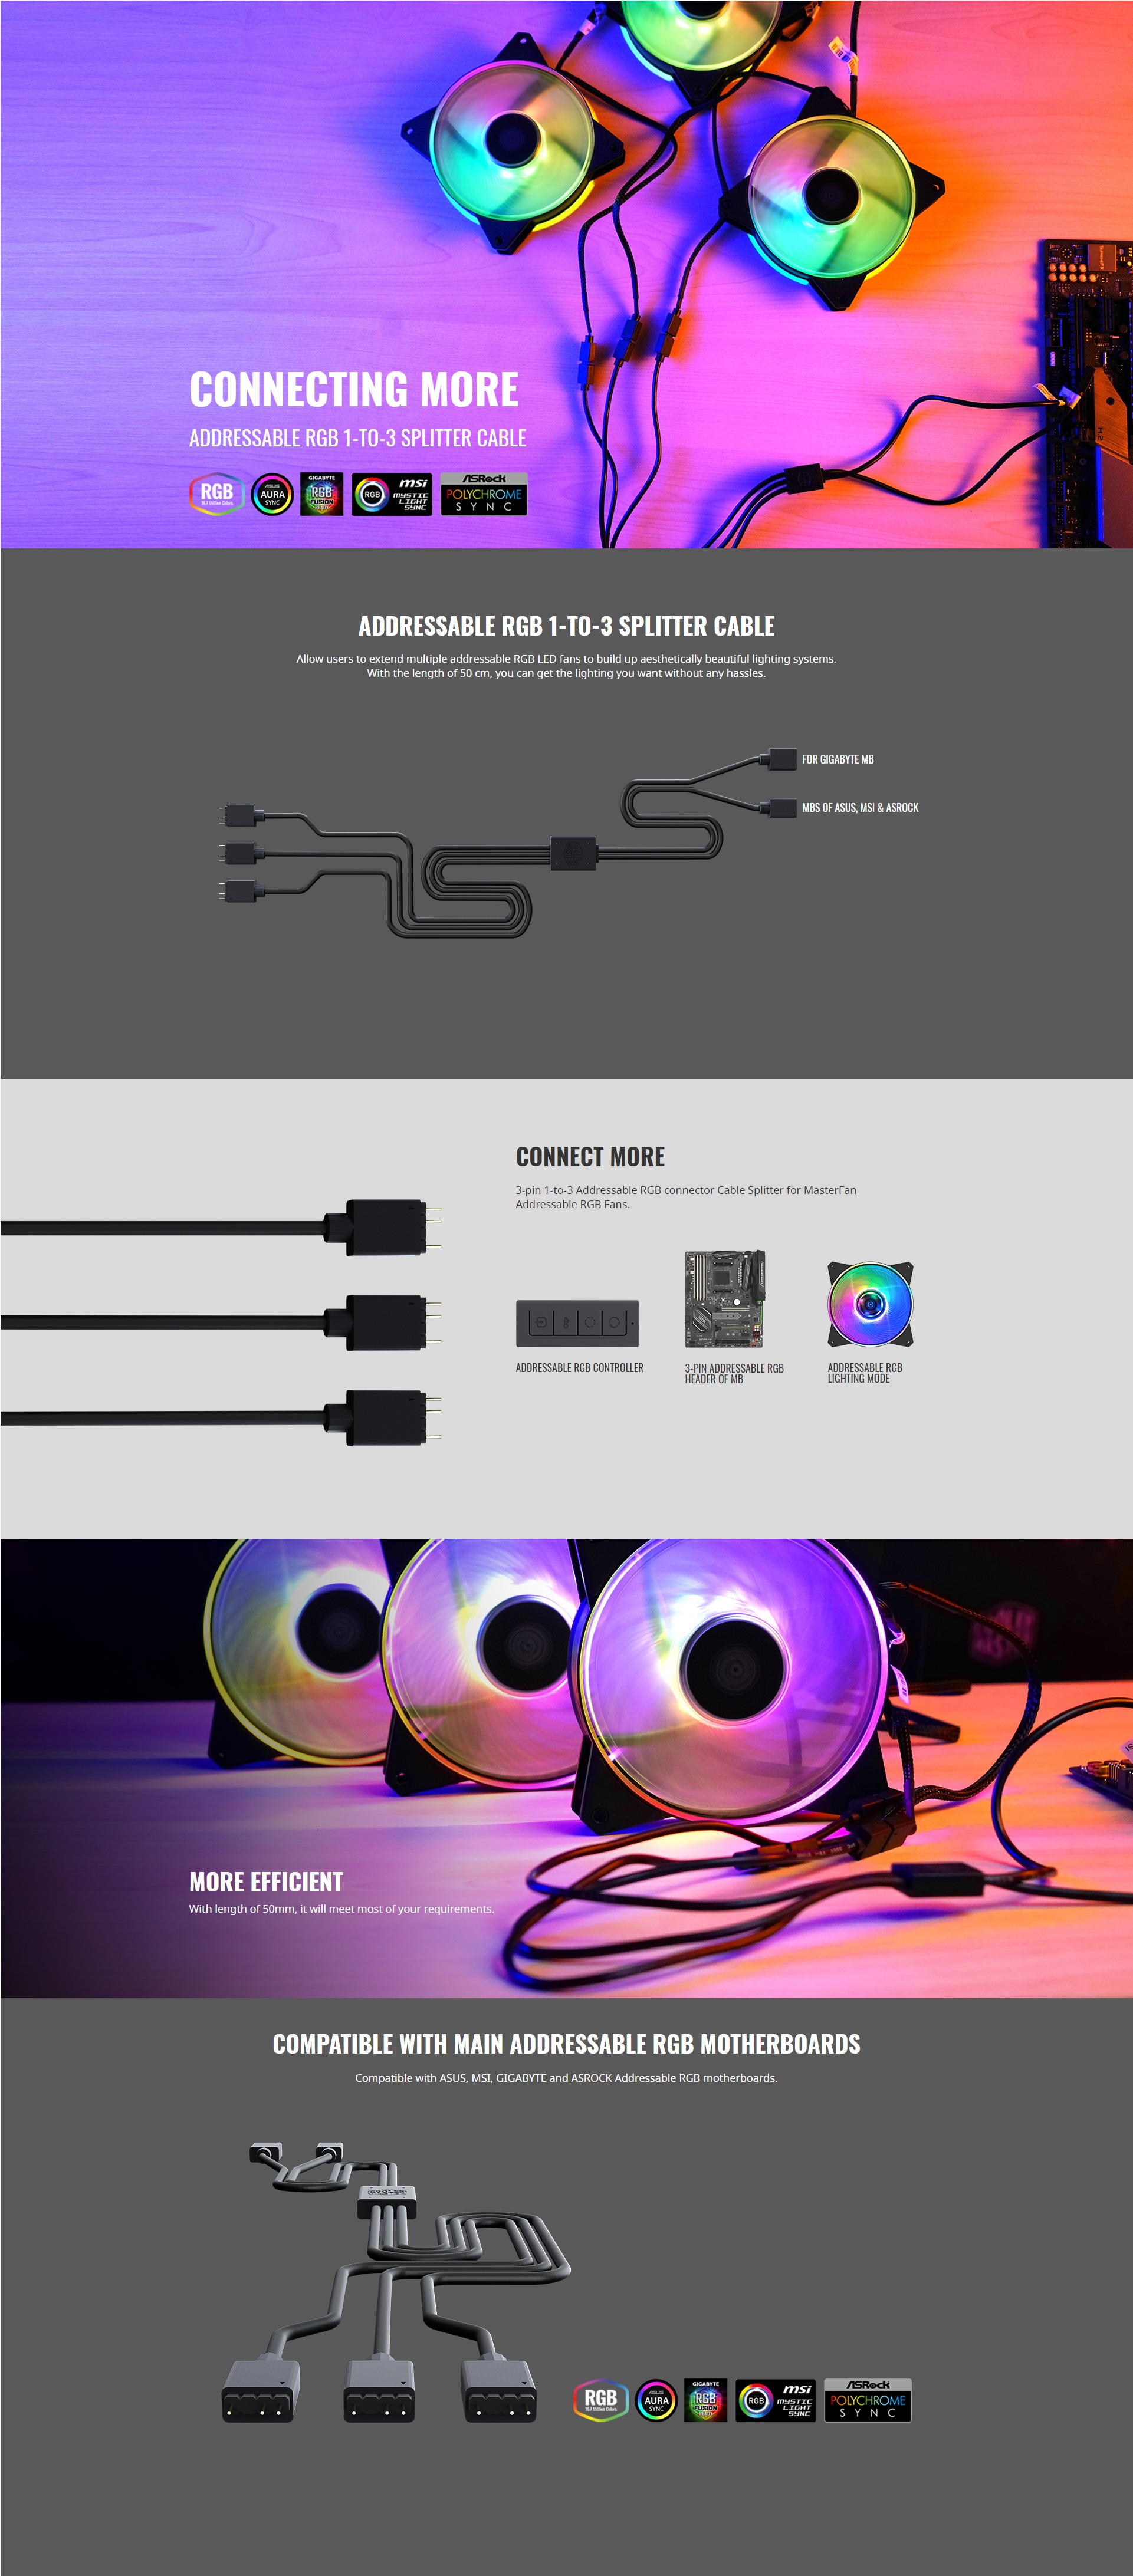 A large marketing image providing additional information about the product Cooler Master Addressable RGB 1-to-3 Splitter Cable - Additional alt info not provided